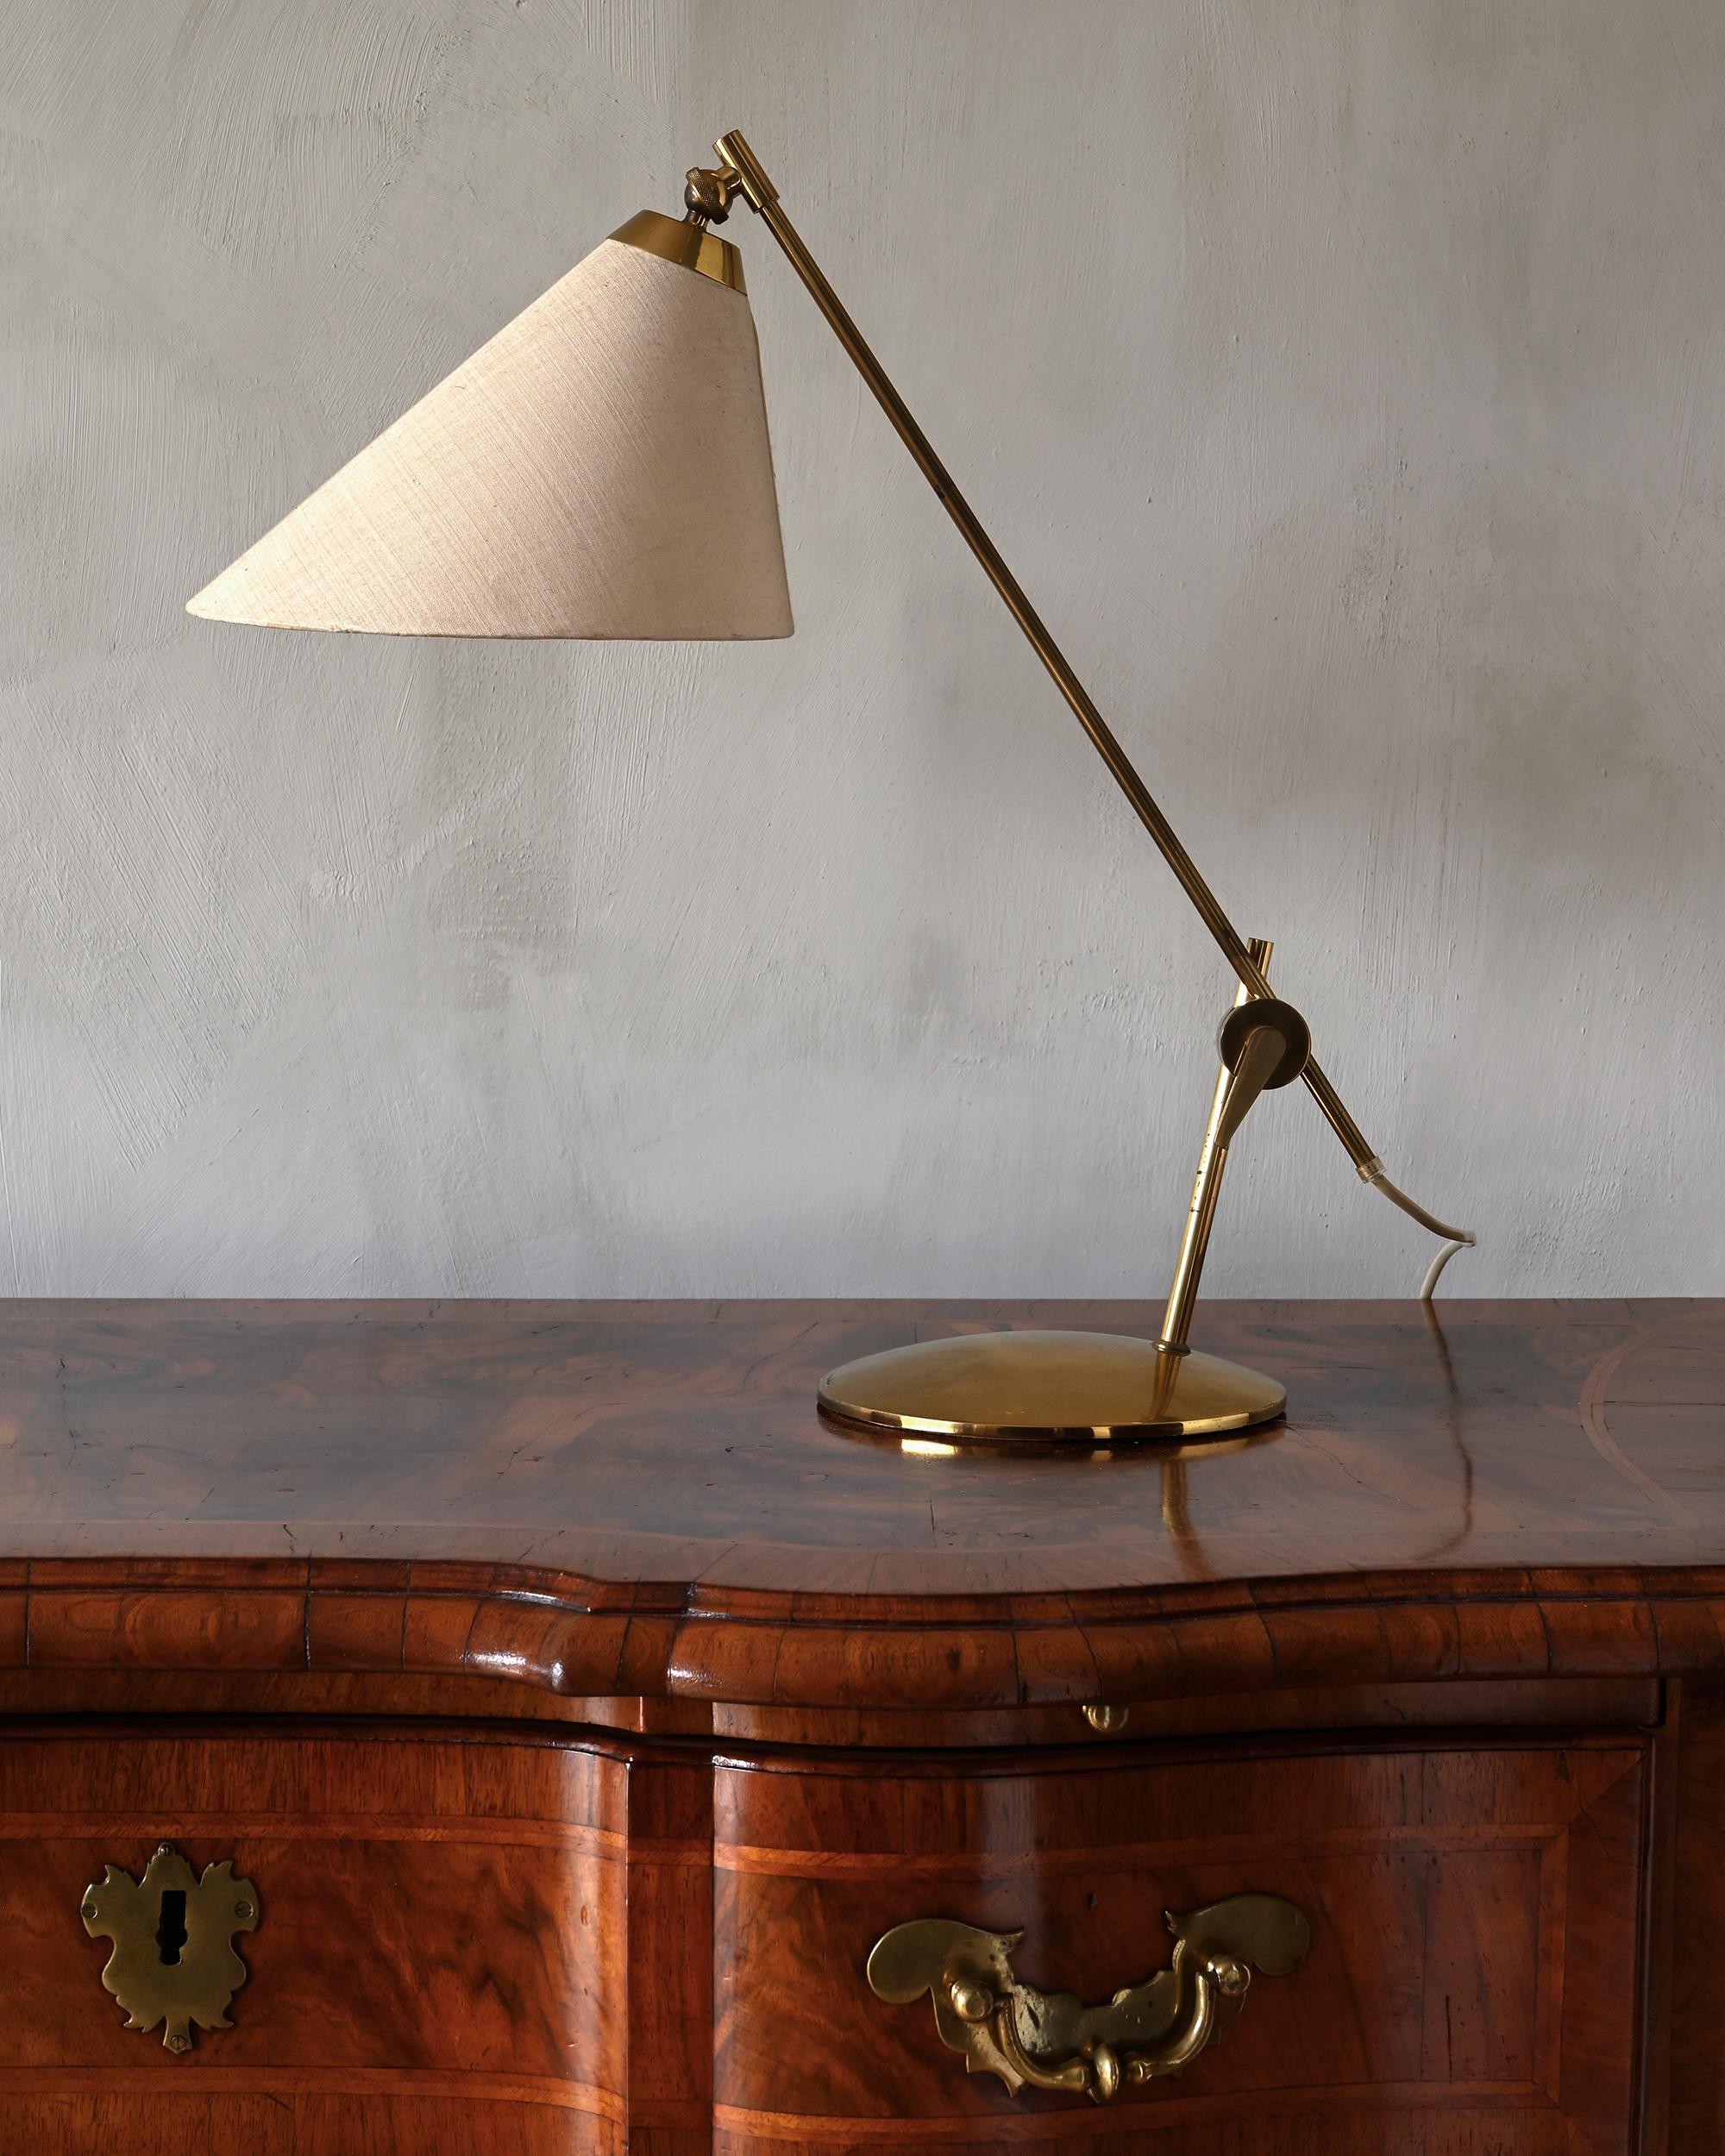 Th. Valentiner adjustable brass table lamp manufactured by Poul Dinesen in 1950s, Denmark.